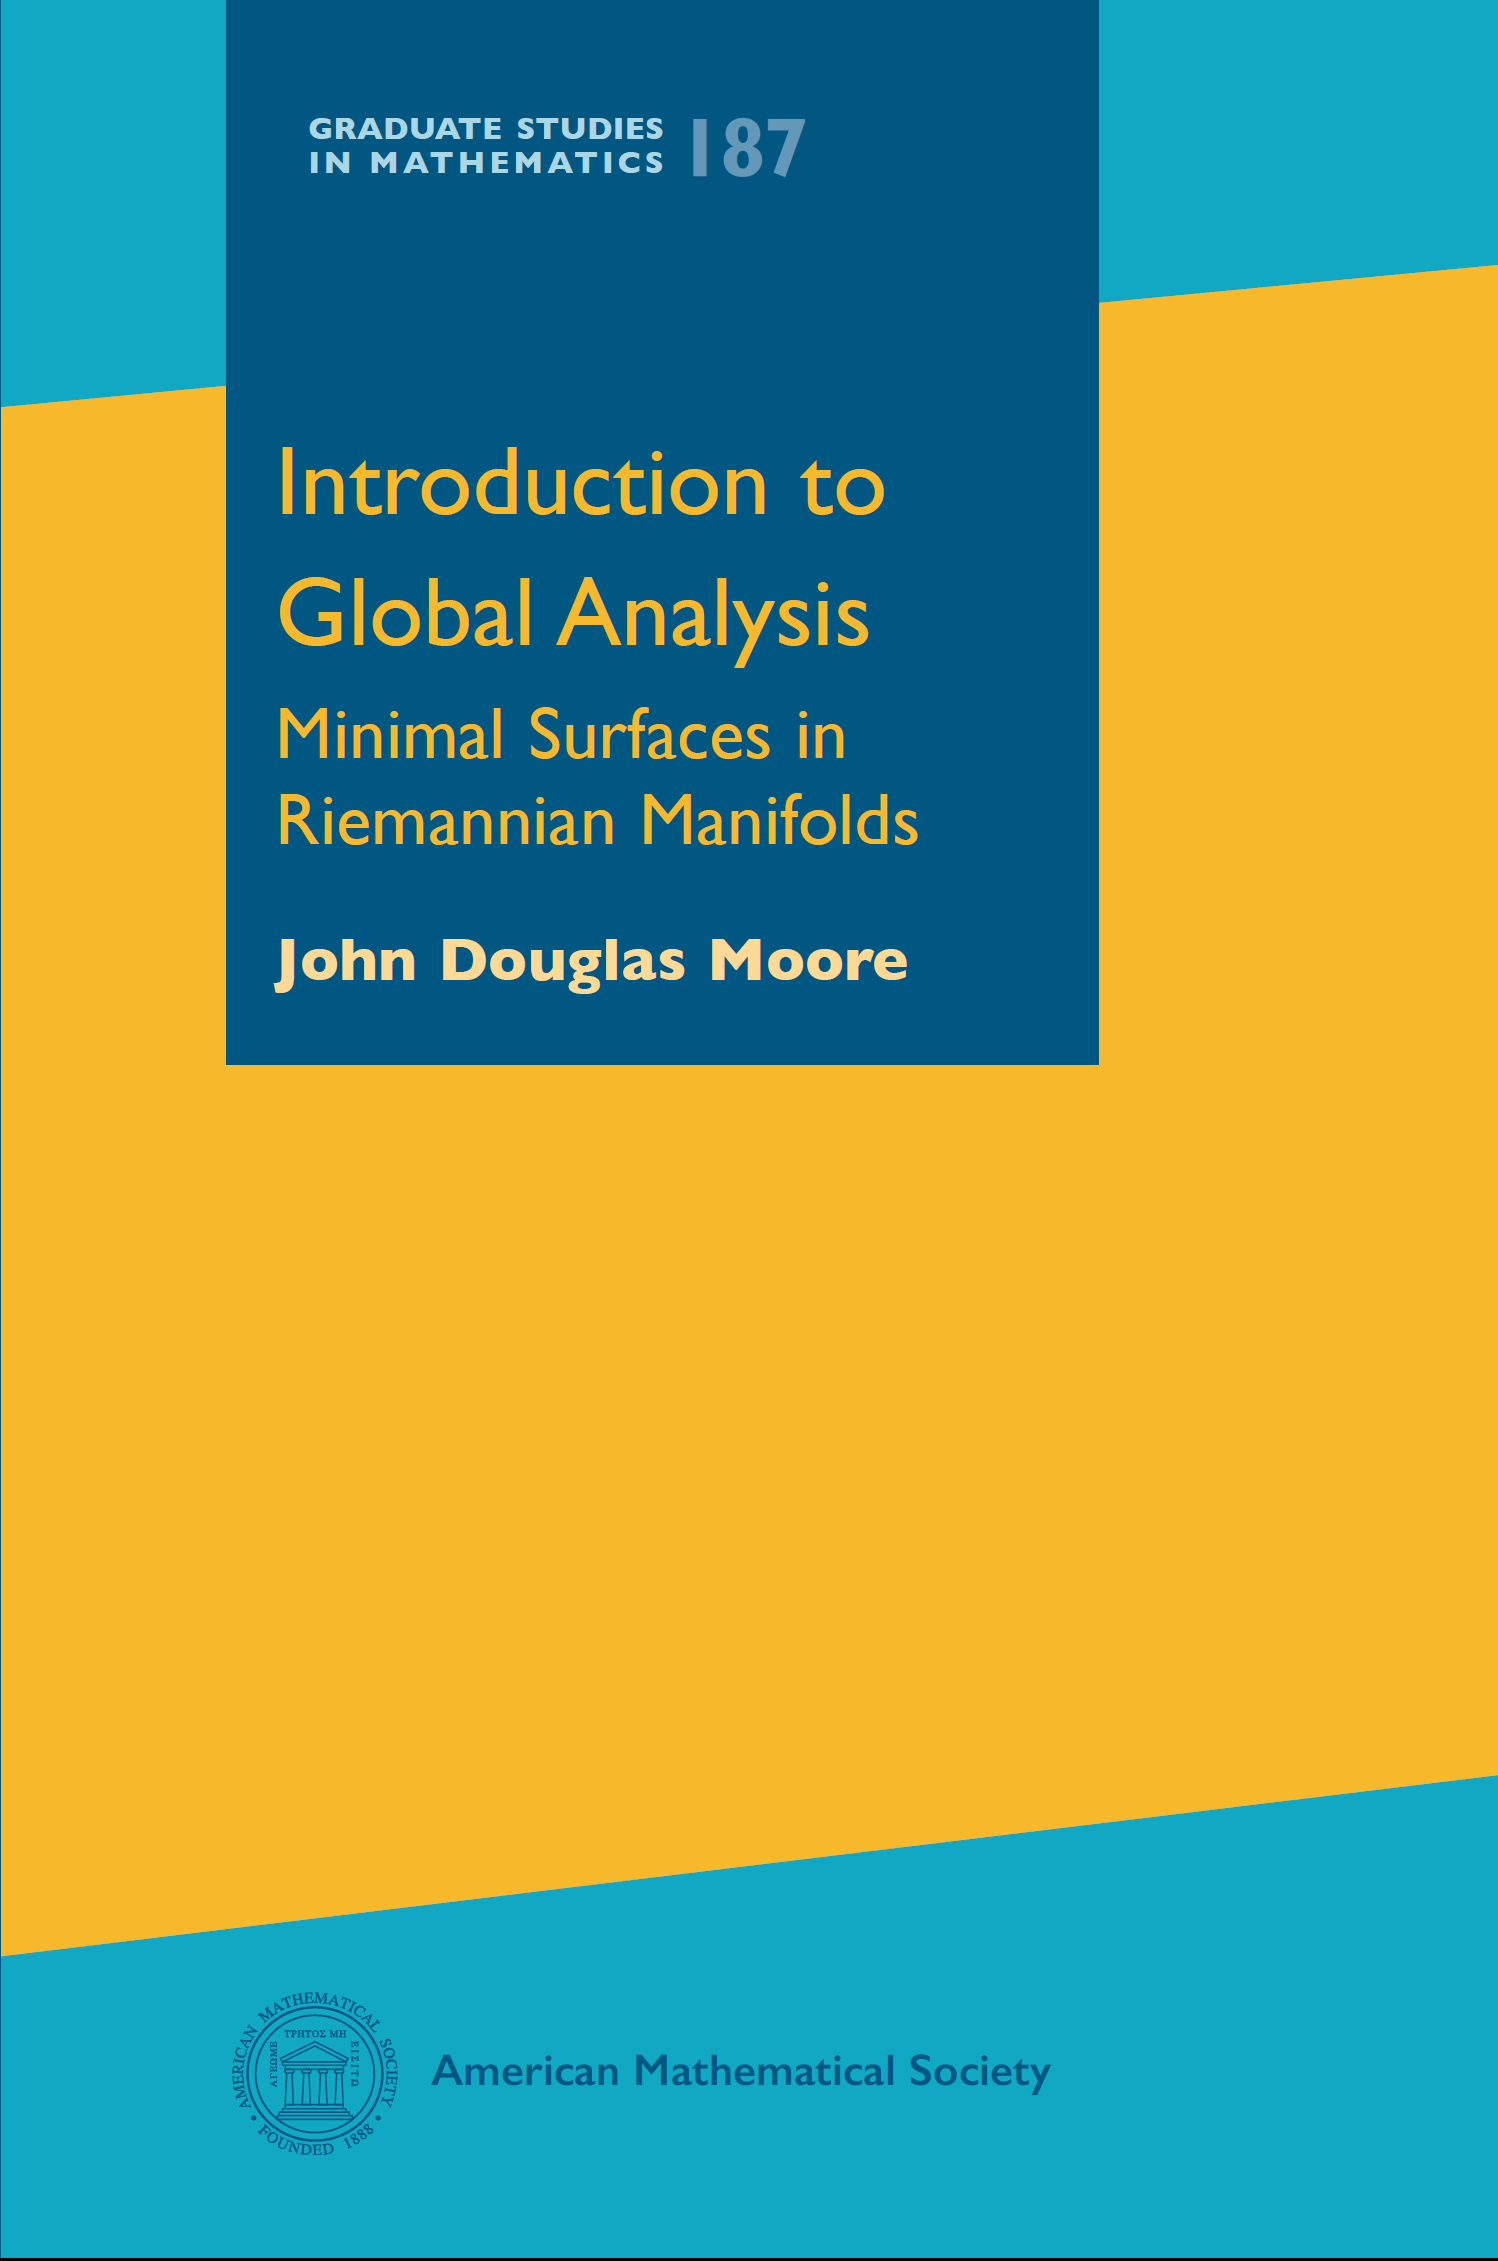 ams gsm introduction to global analysis minimal surfaces in